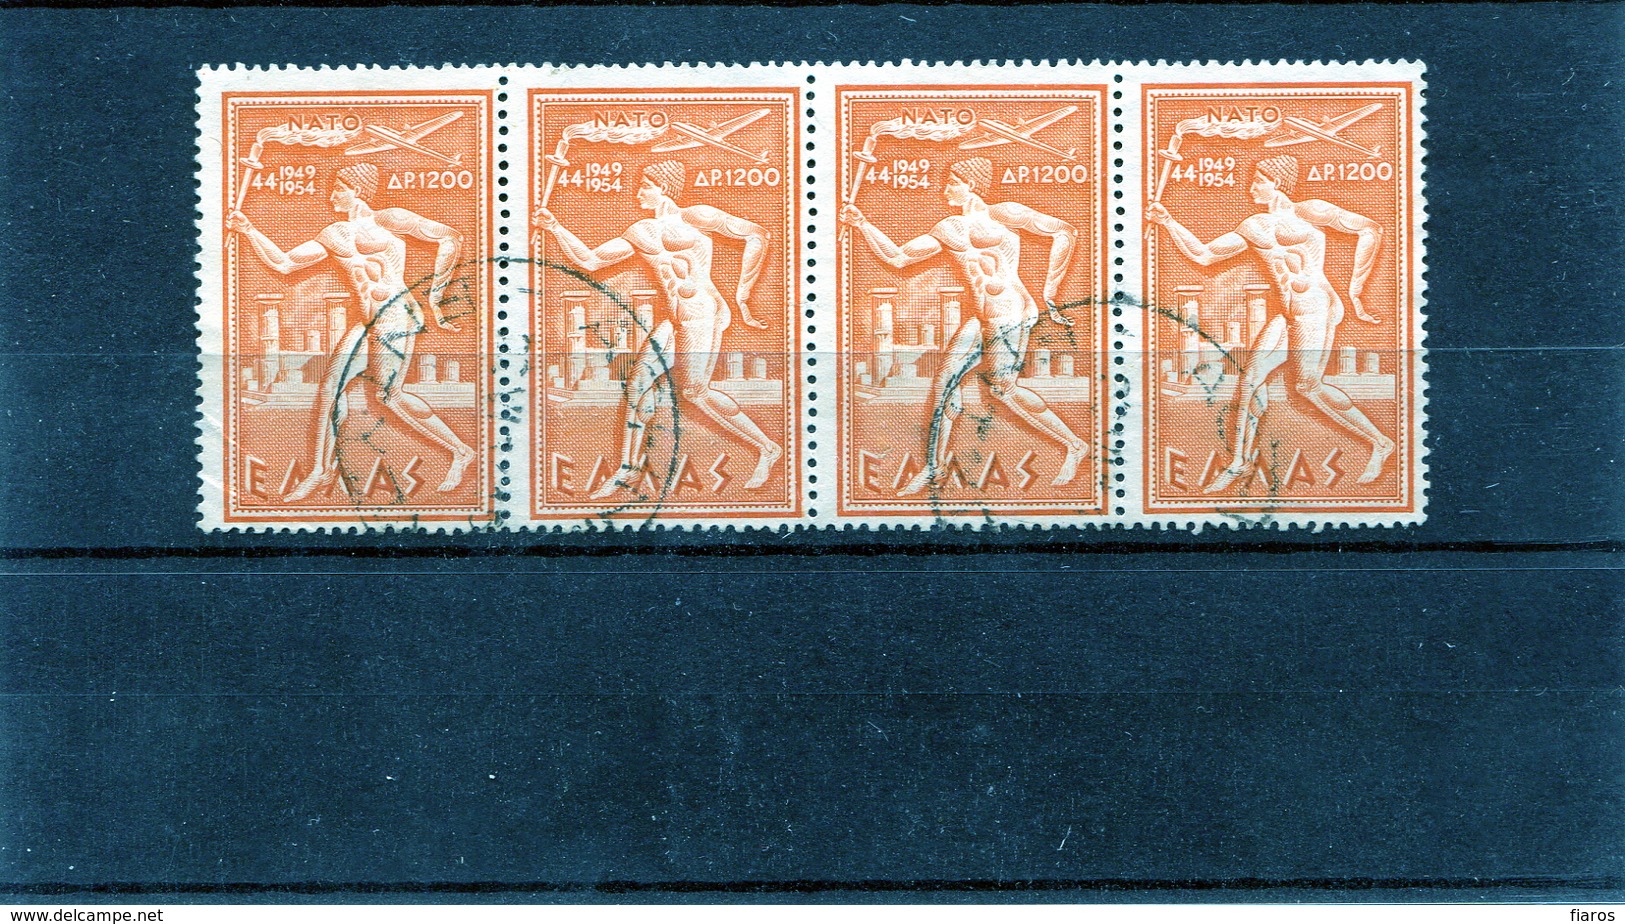 1954-Greece- "N.A.T.O." Airpost- 1.200dr. Used In Strip Of 4, W/ "Athens - Printed Matter" [22.6.1954] Type X Postmarks - Usati